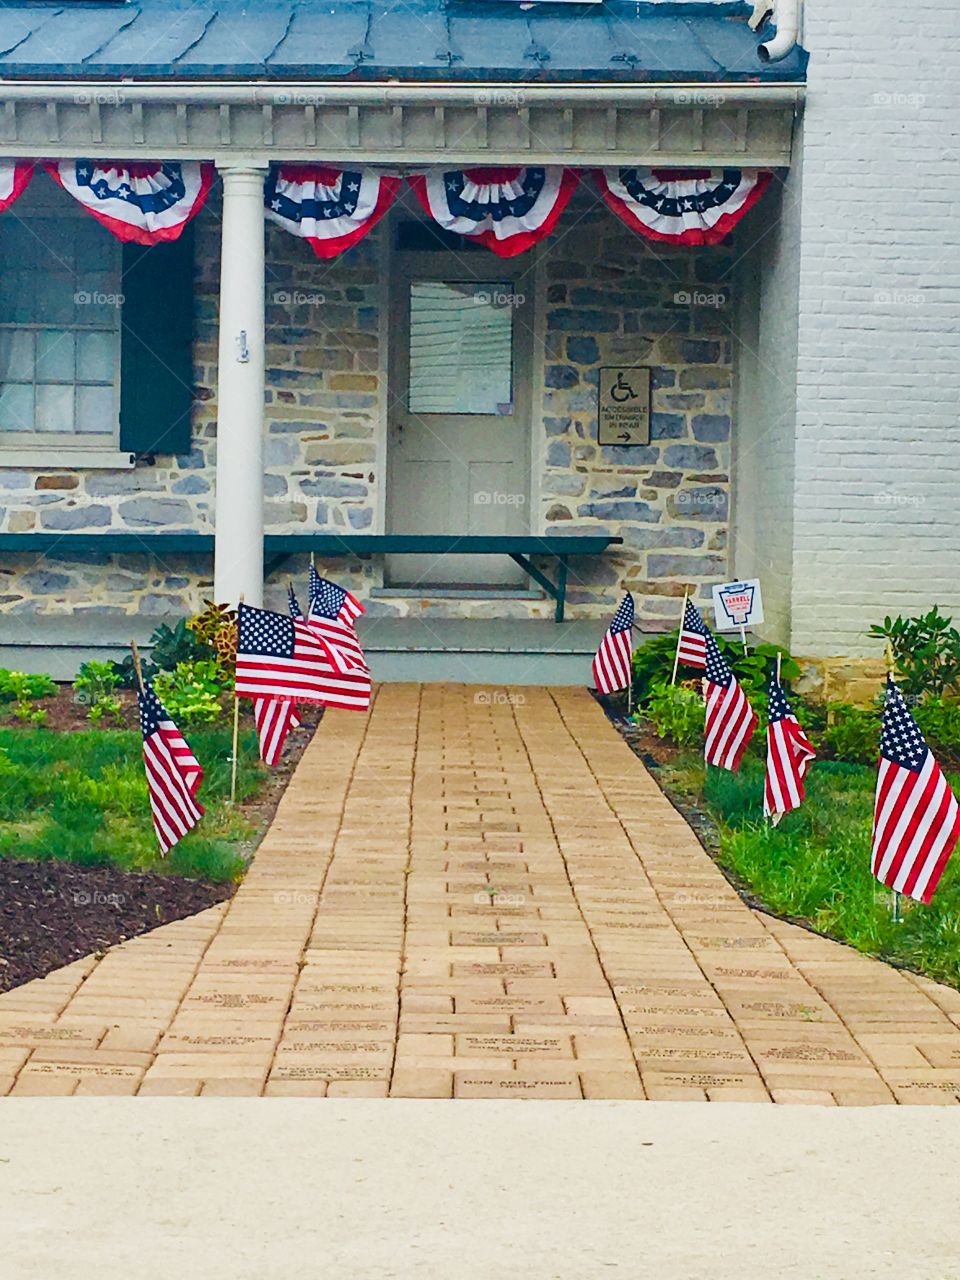 Stone house and walk way with American flags